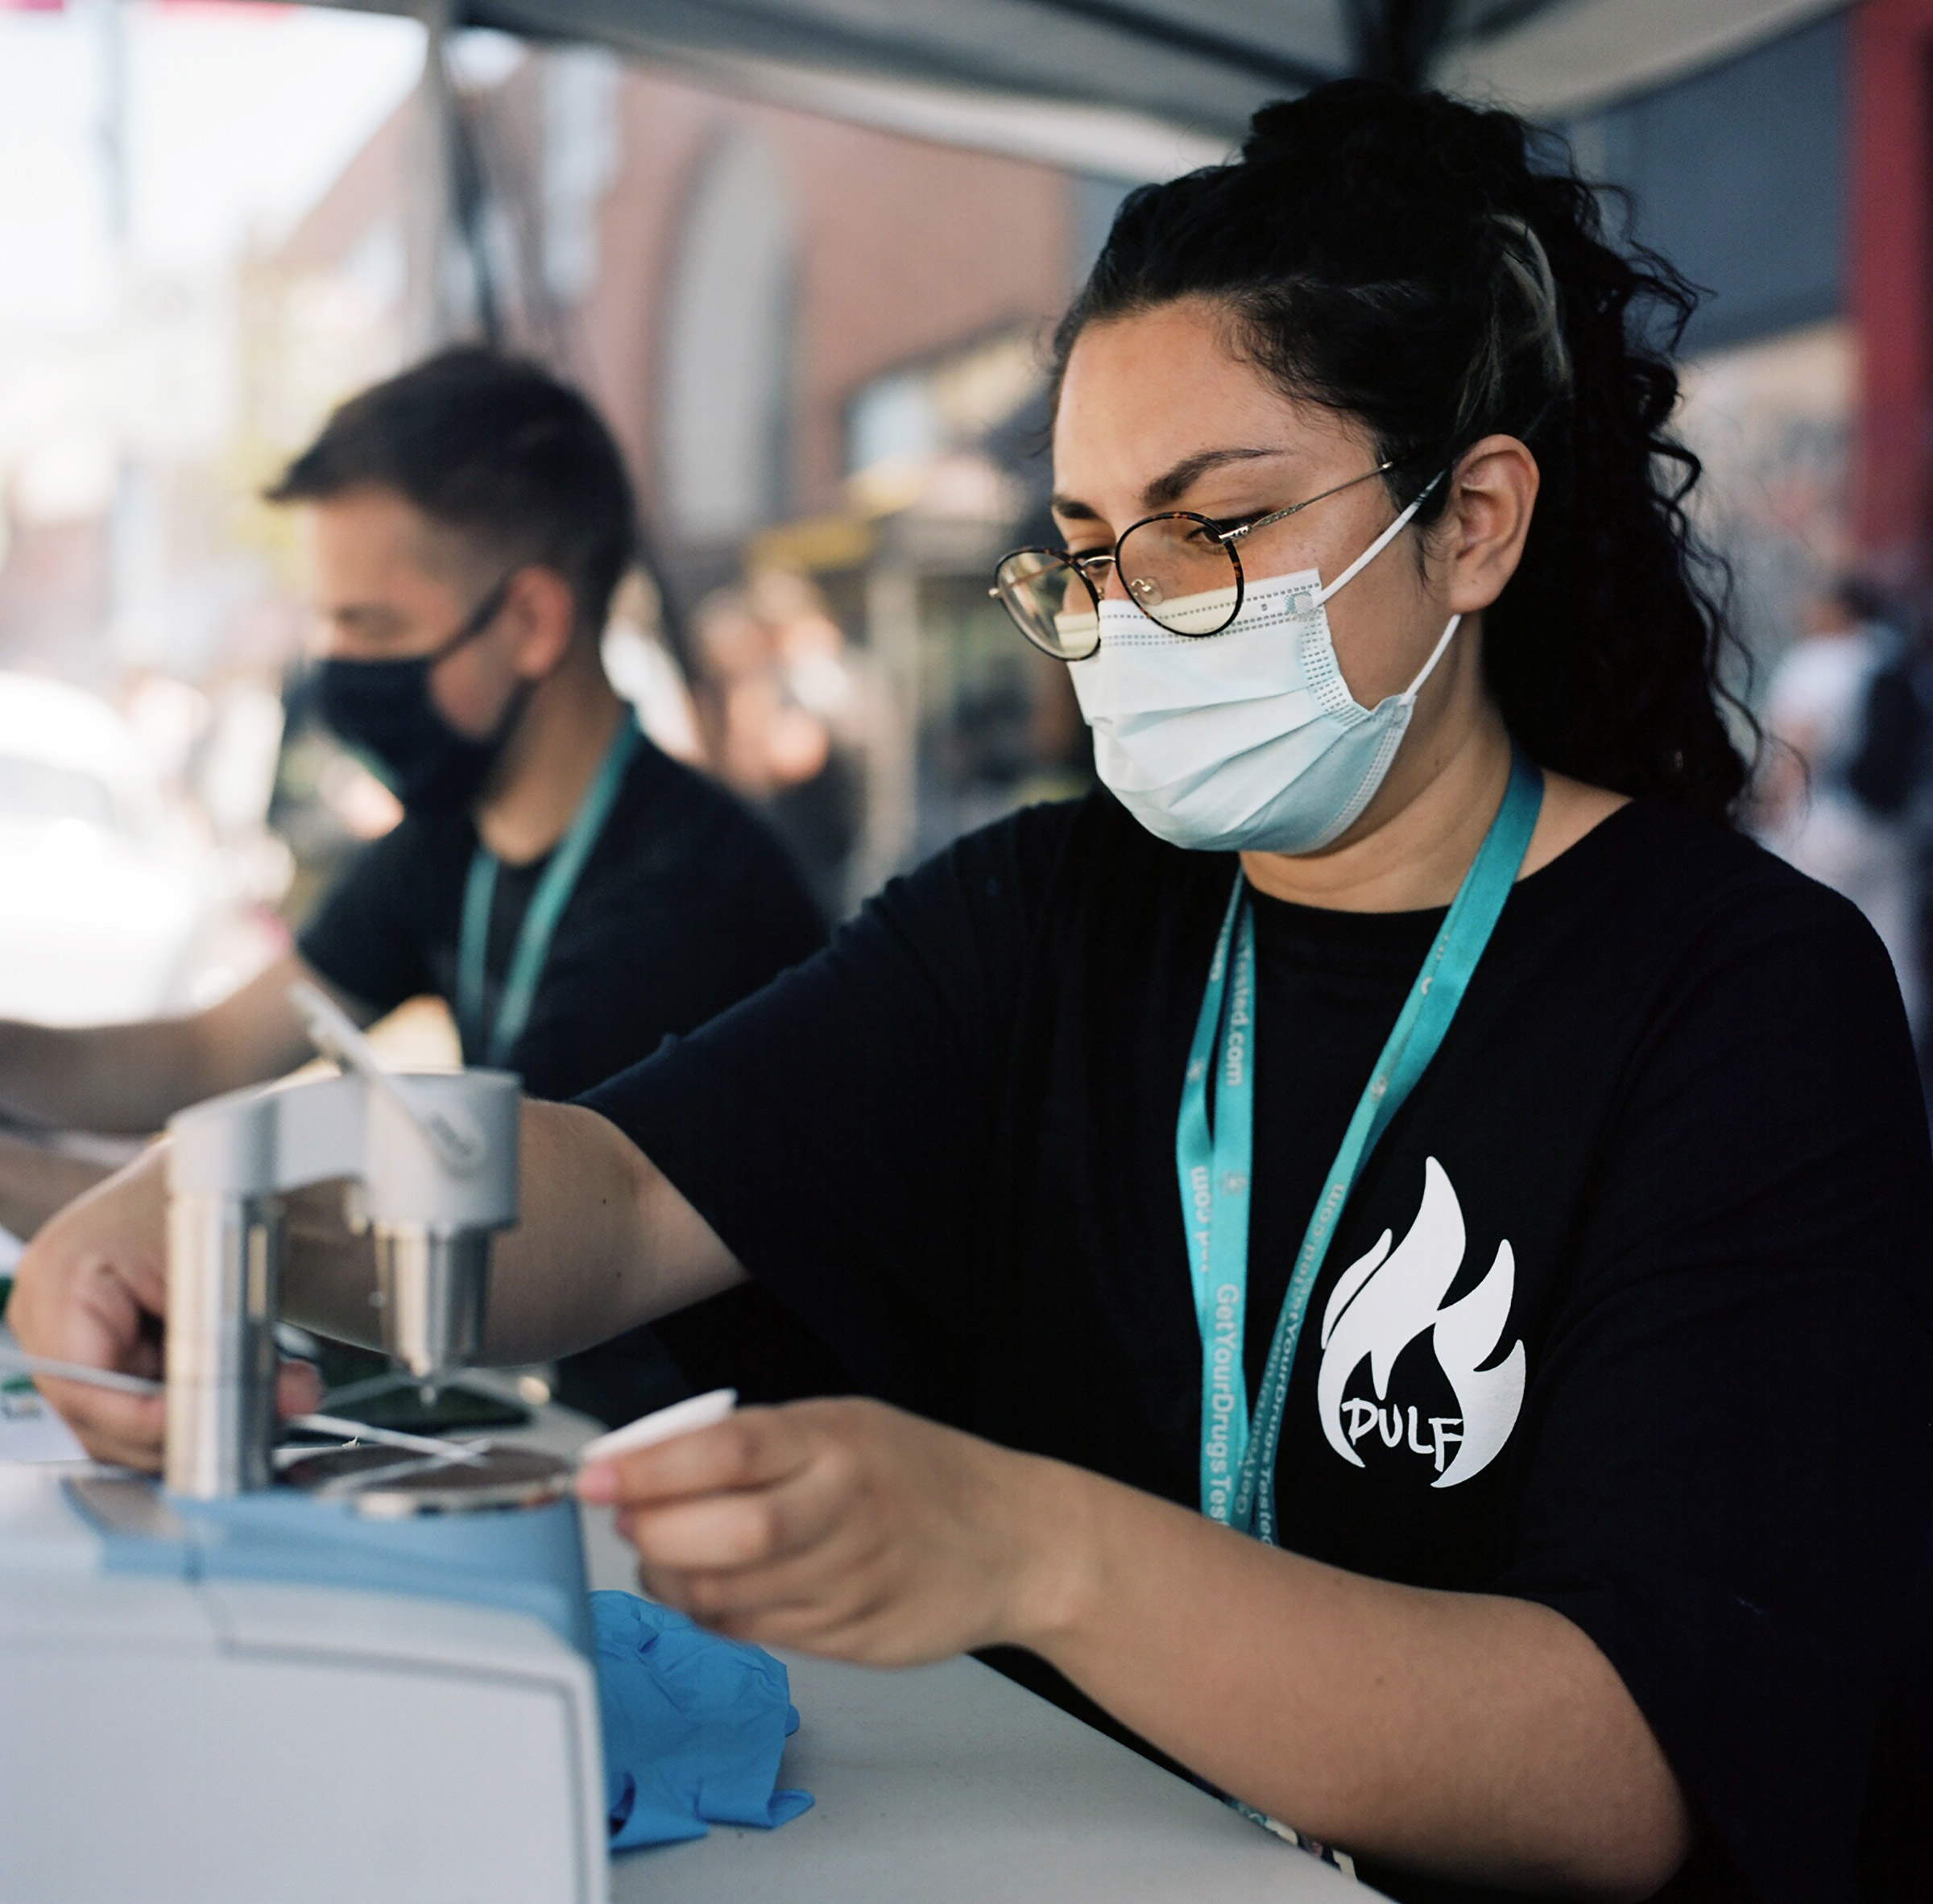 Sara Guzman uses an FTIR spectometry device to test drugs that people bring to a tent hosted by Get Your Drugs Tested Harm Reduction Center at the most recent  DULF demonstration in Vancouver B.C. on July 14, 2021. Jackie Dives